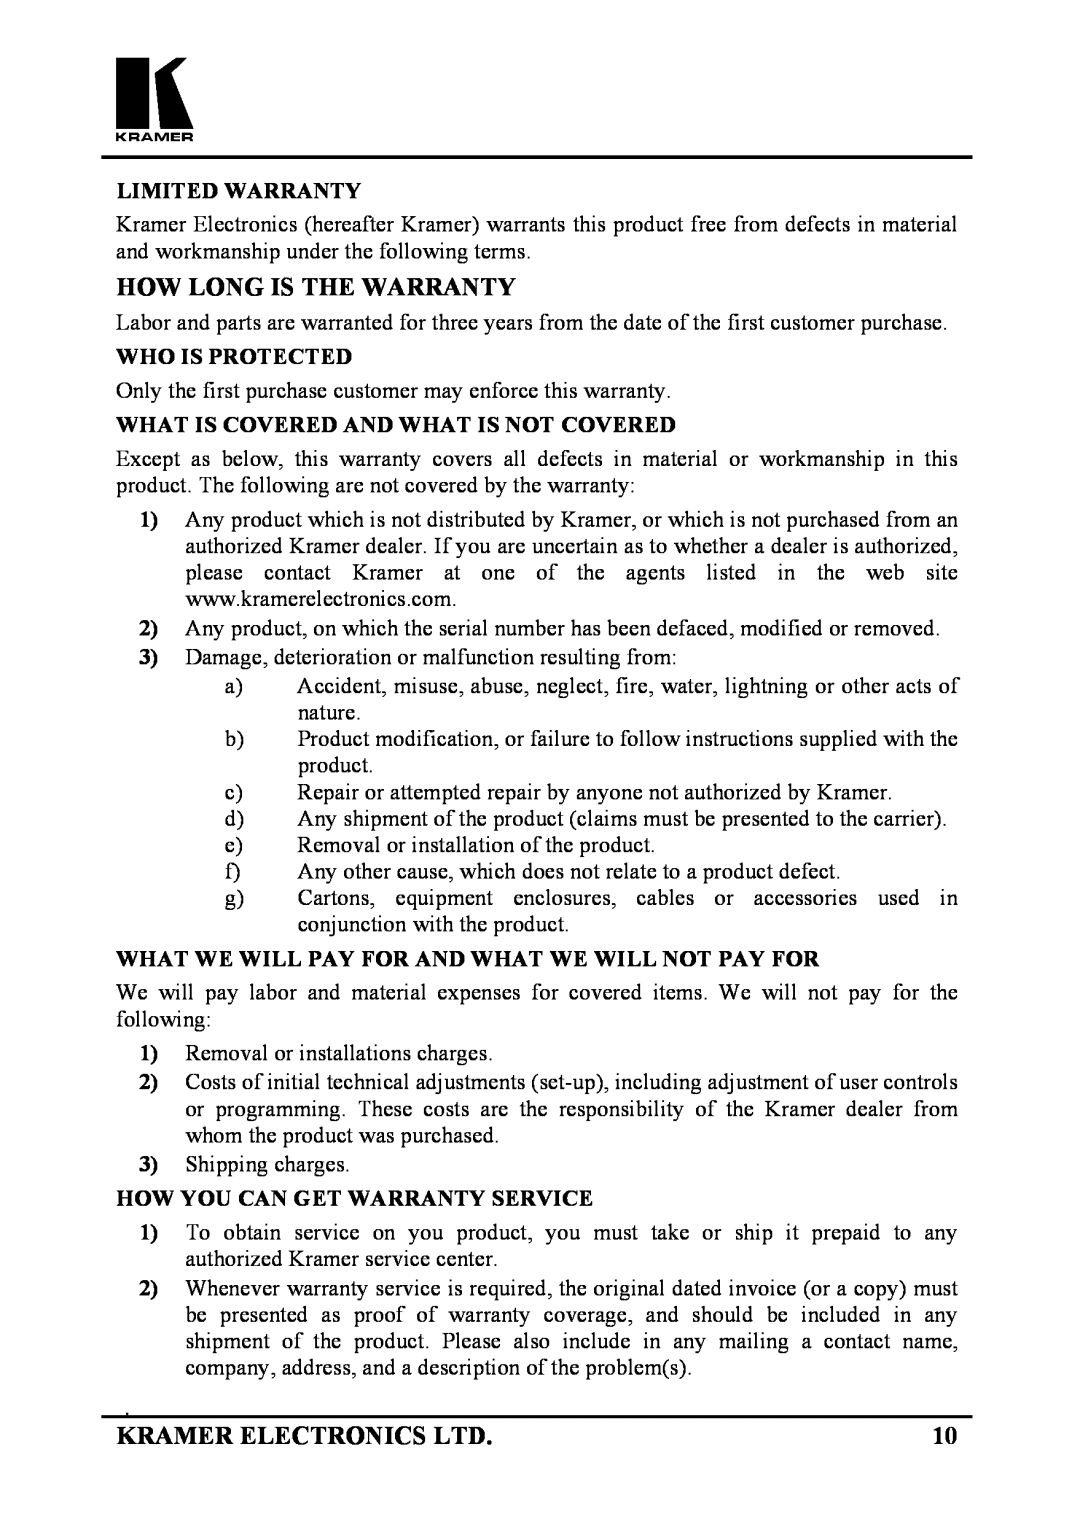 Kramer Electronics 123V user manual Limited Warranty, Who Is Protected, What Is Covered And What Is Not Covered 